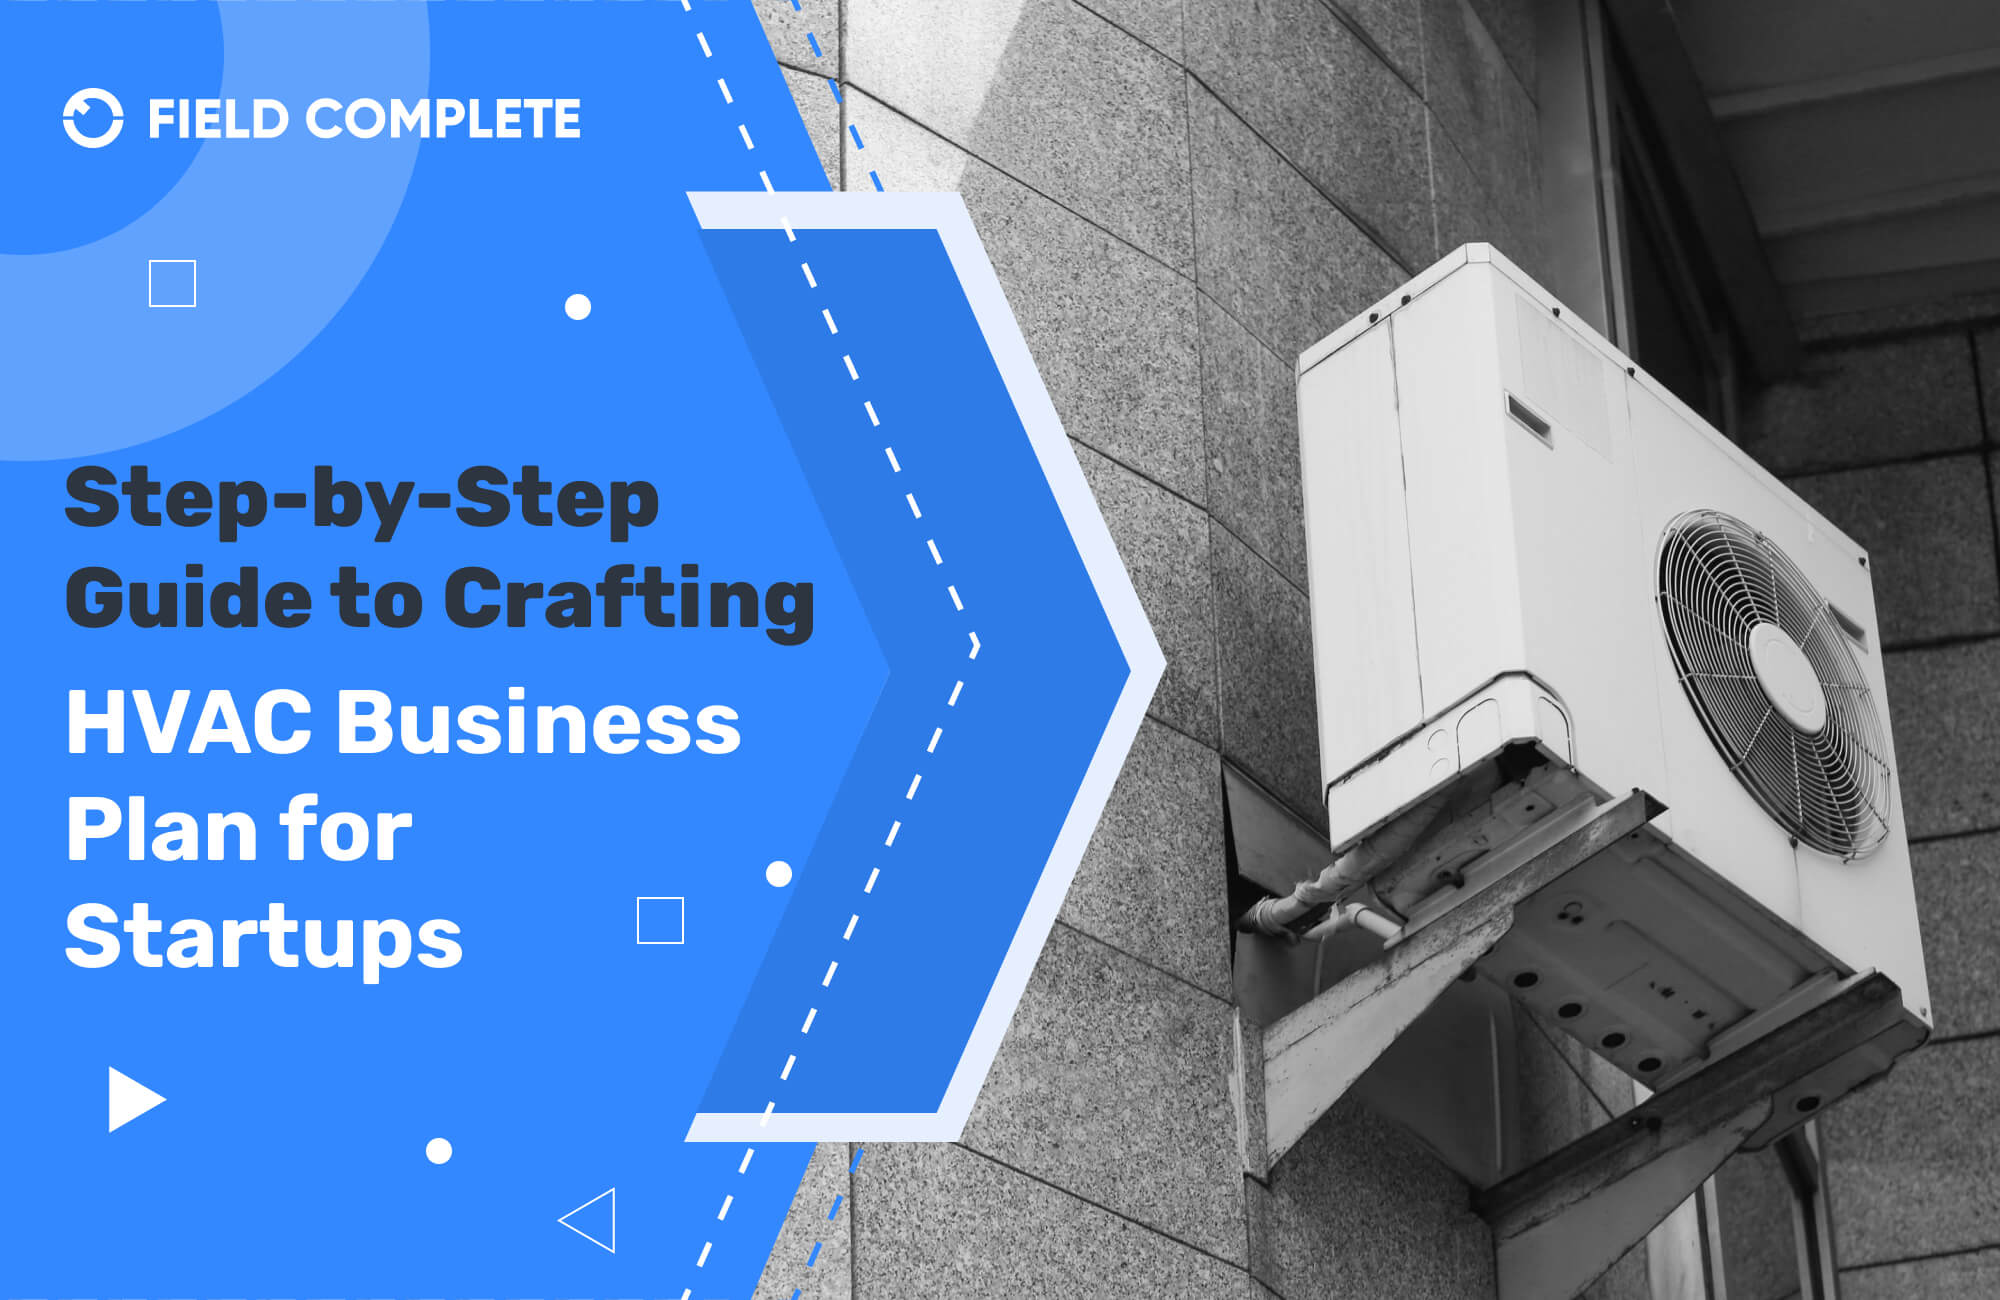 Step-by-Step Guide to Crafting an HVAC Business Plan for Startups